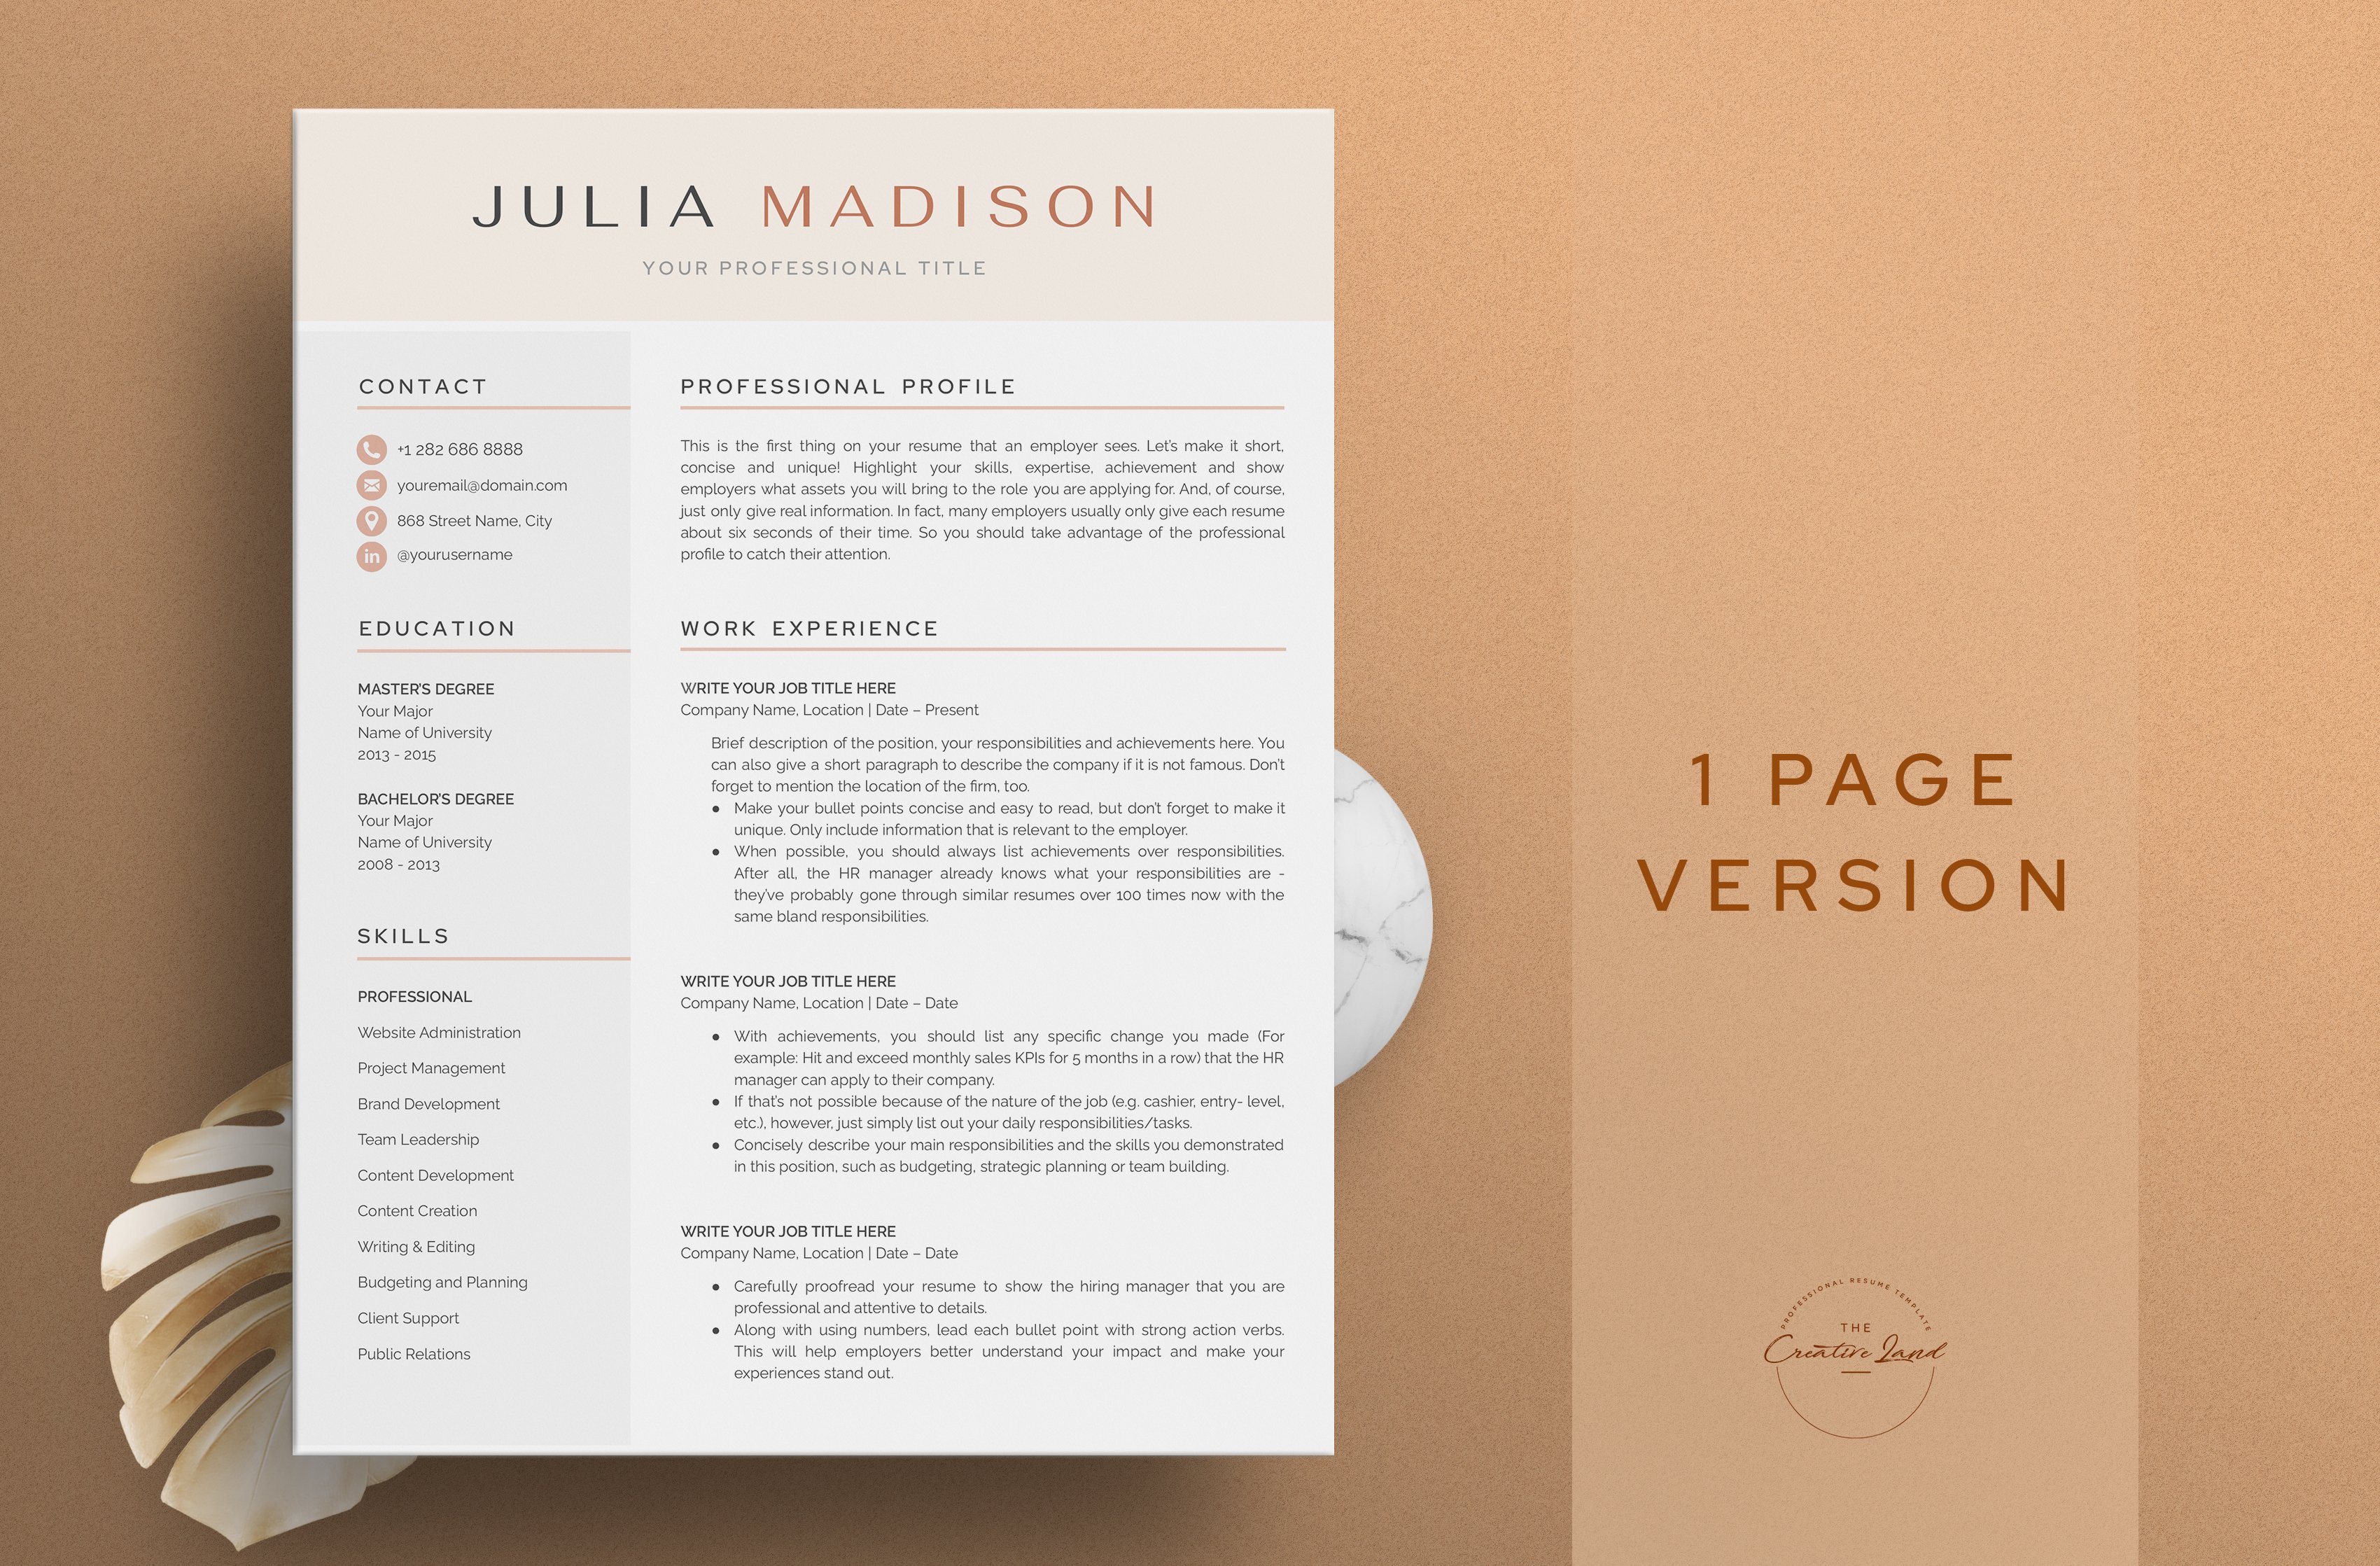 Resume/CV - The Madison preview image.